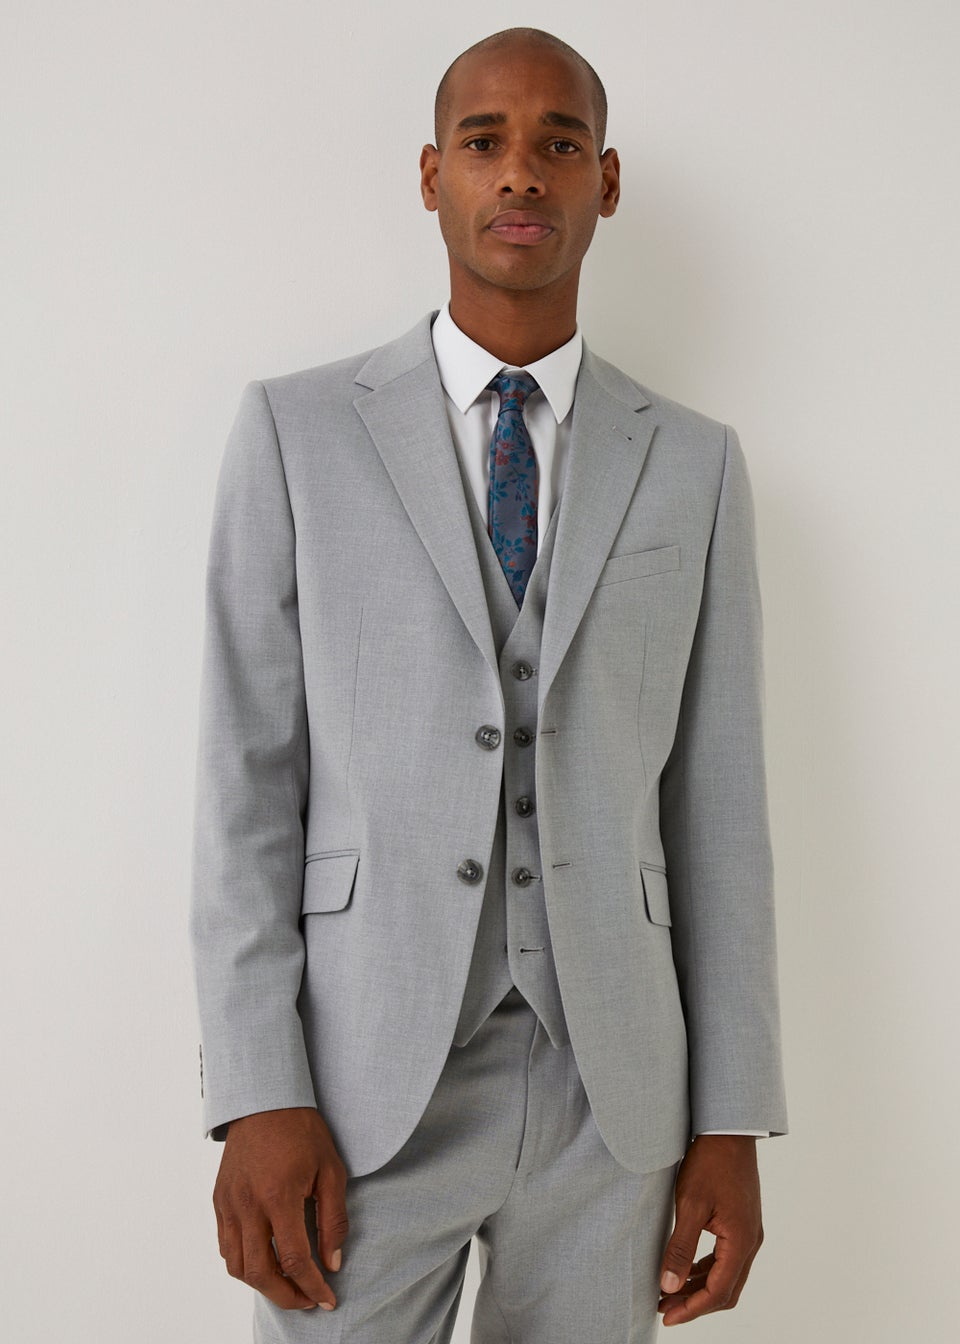 10 Dapper Grey Suits You'll Fall In Love With  Grey suit styling, Grey suit  men, Black and grey suit